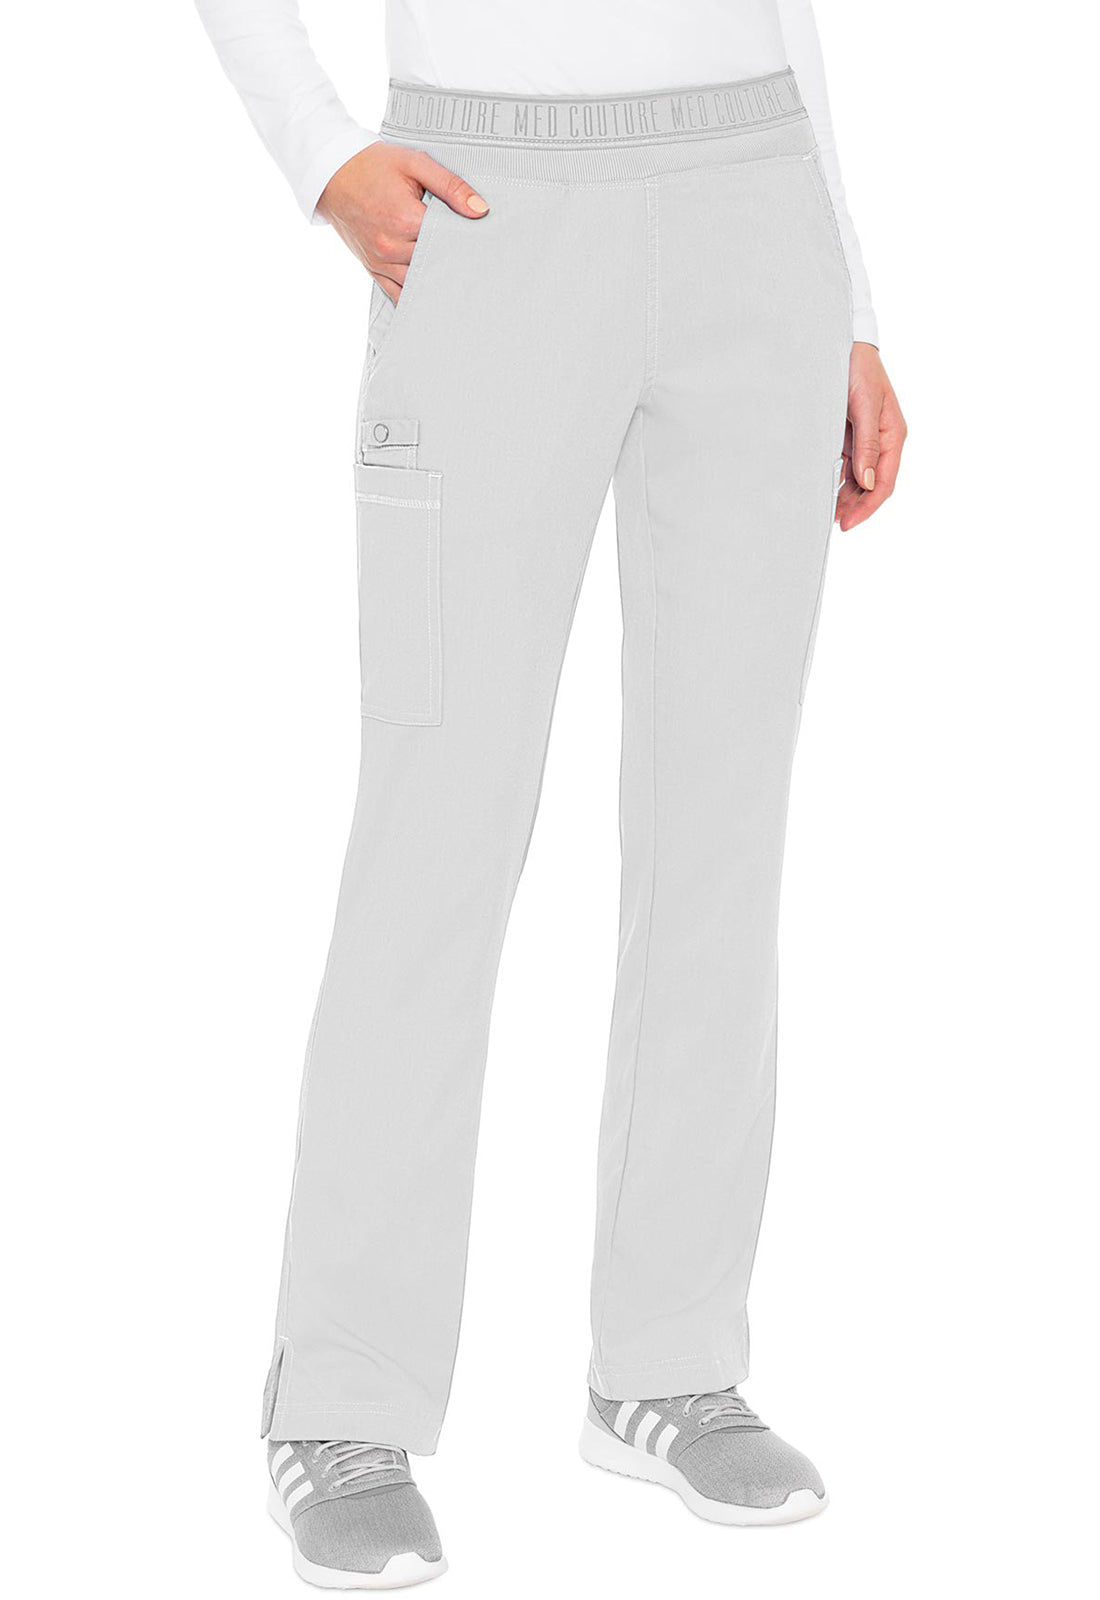 Med Couture Touch Yoga 2 Cargo Pocket Pant (16 Colors XS-XL Tall Length)